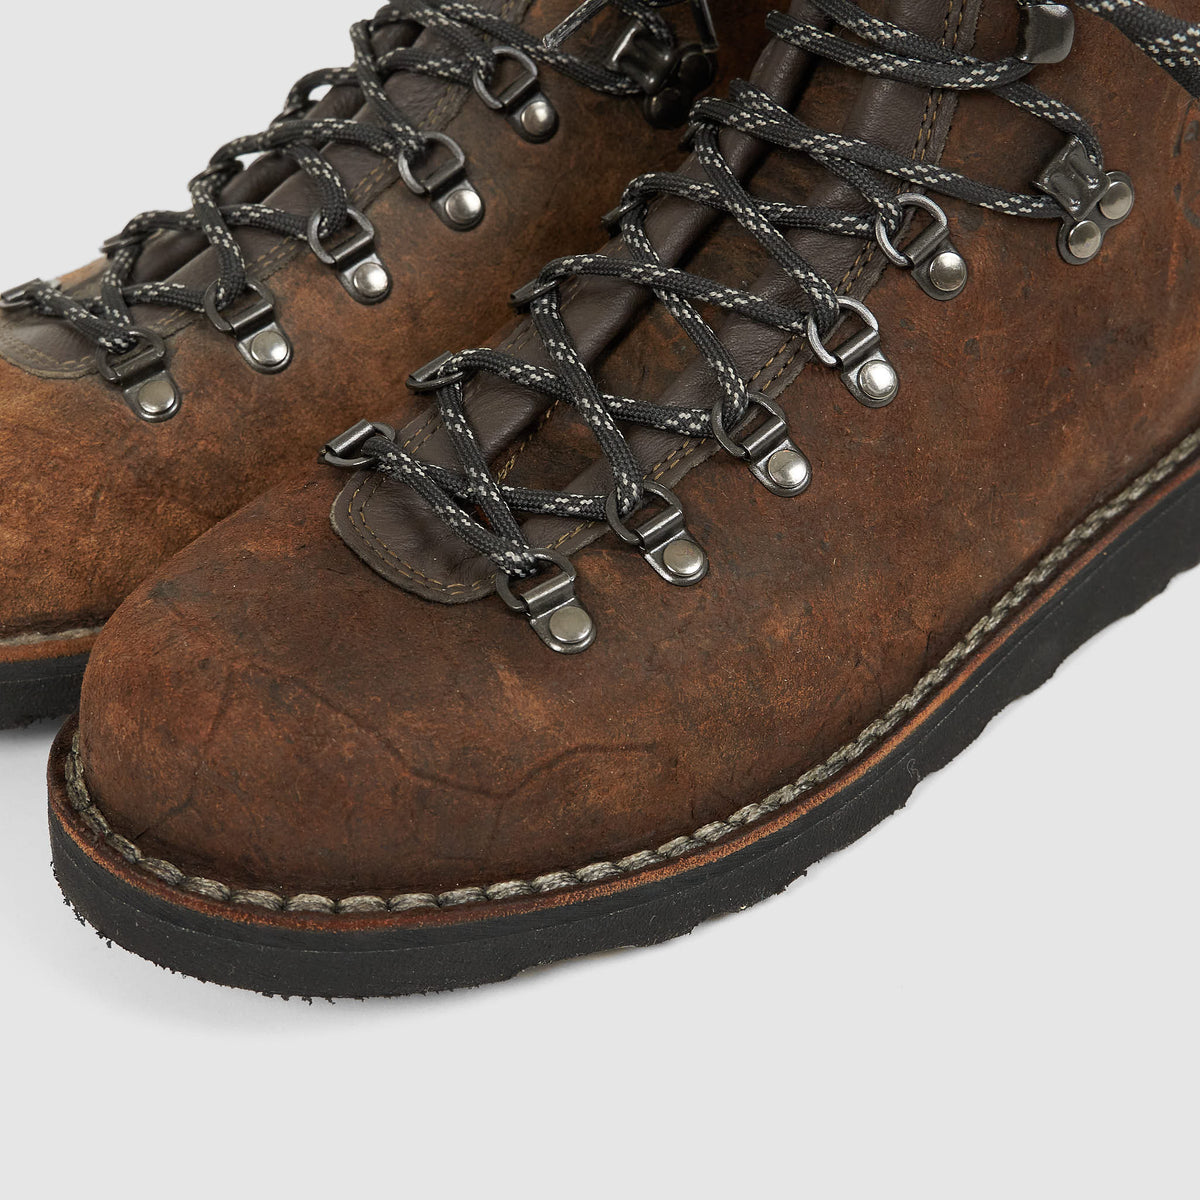 Diemme Vintage  Waxed Leather Hiking Boot